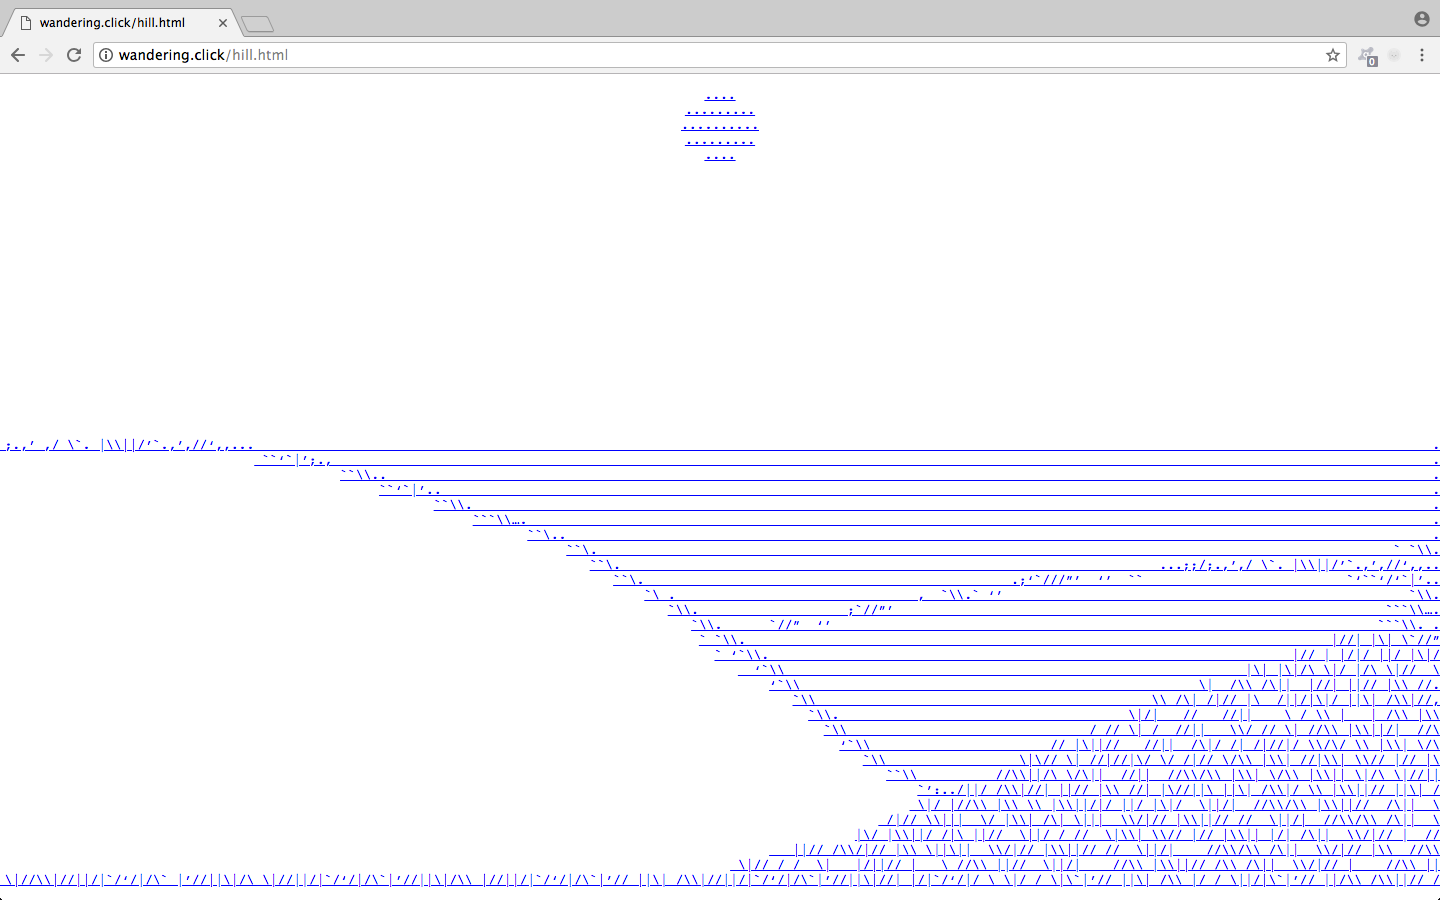 View full size version of a screenshot of ASCII landscape, with hills underneath a sun